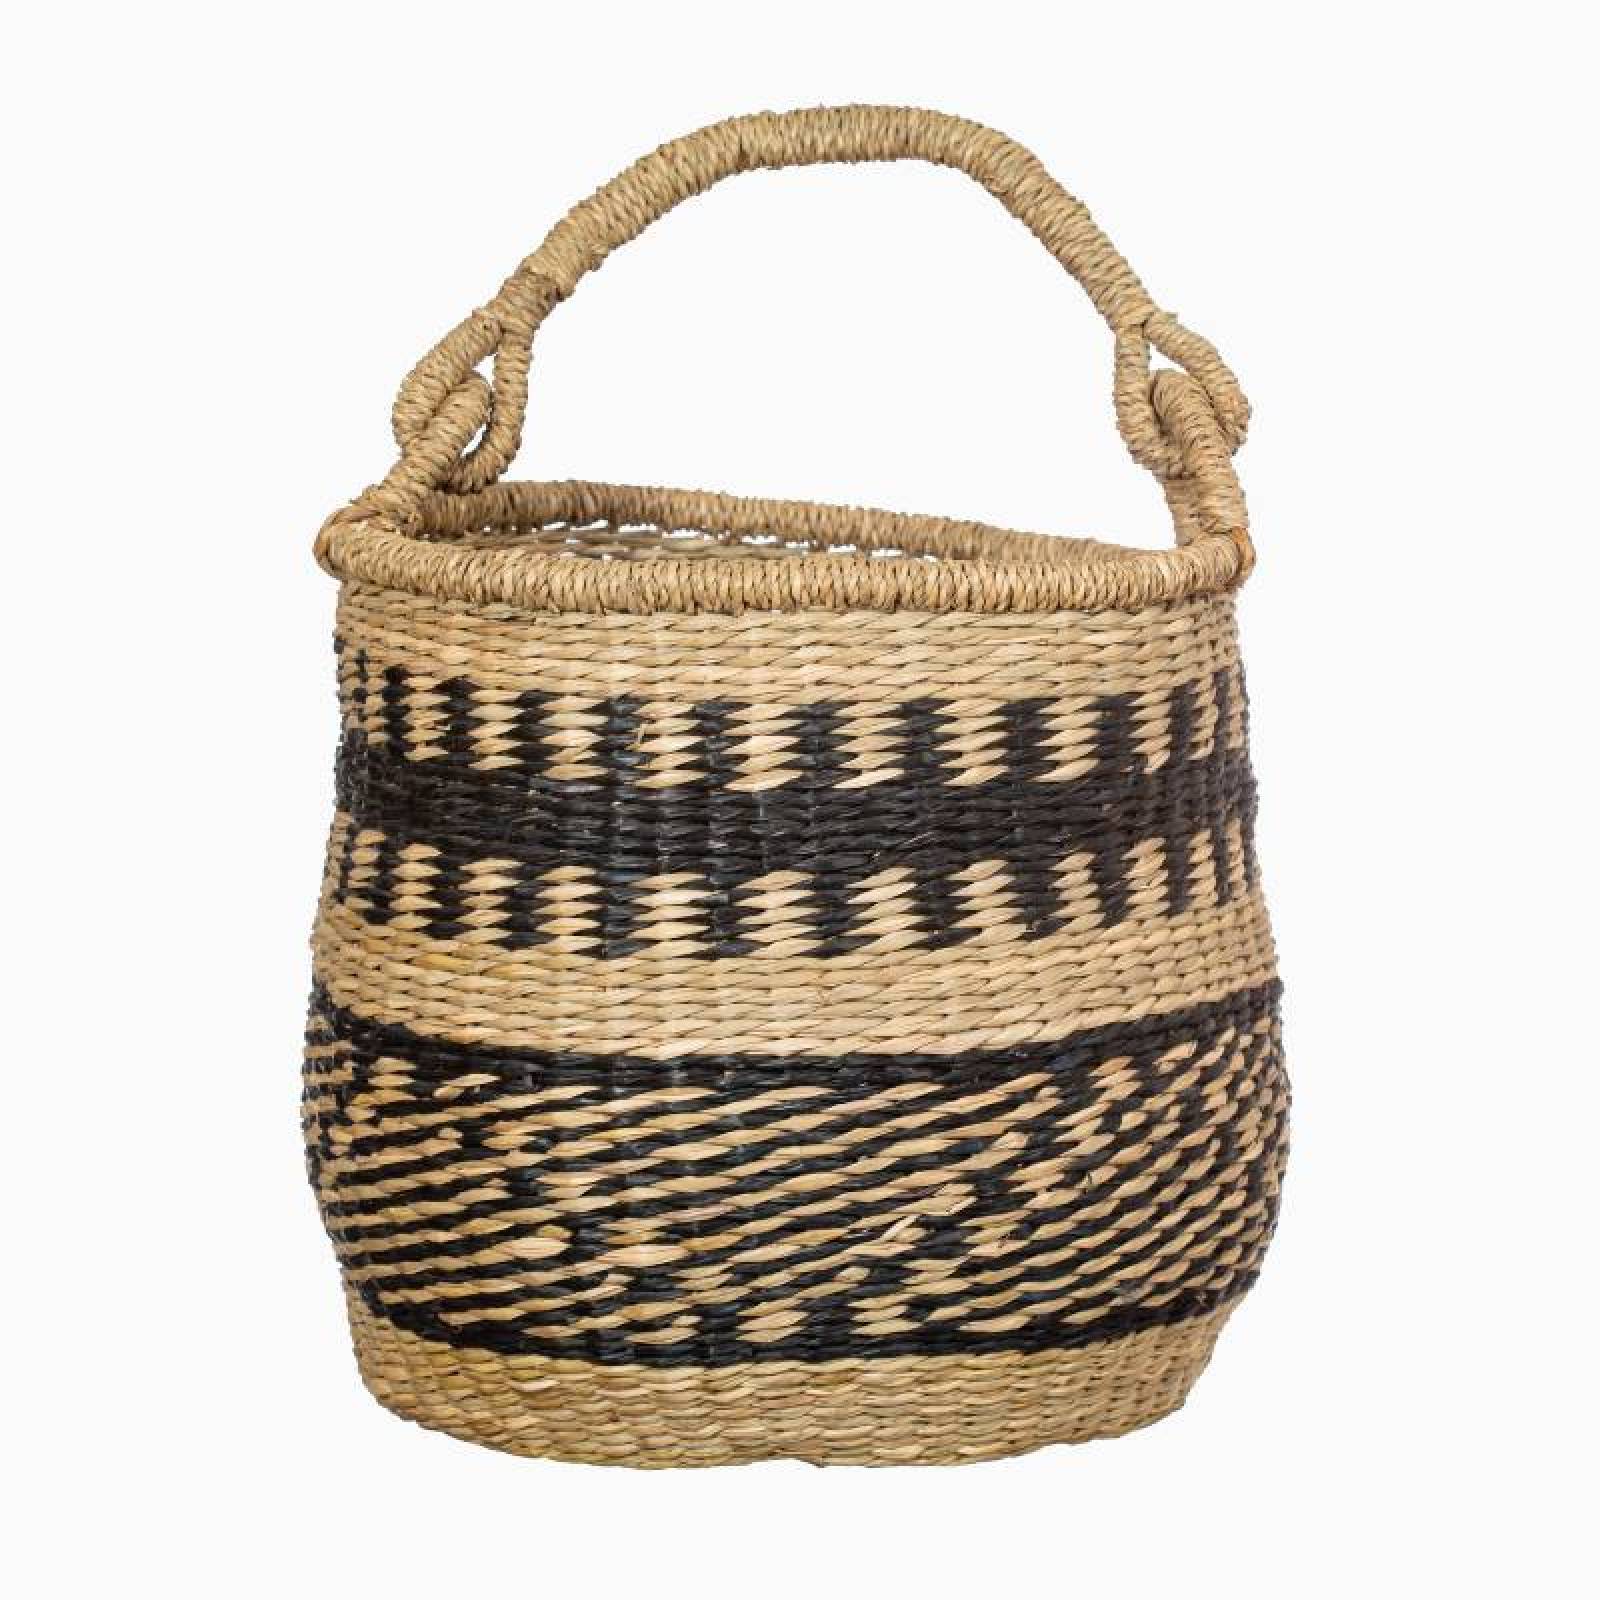 Woven Seagrass Basket With Handle & Black Decorative Pattern